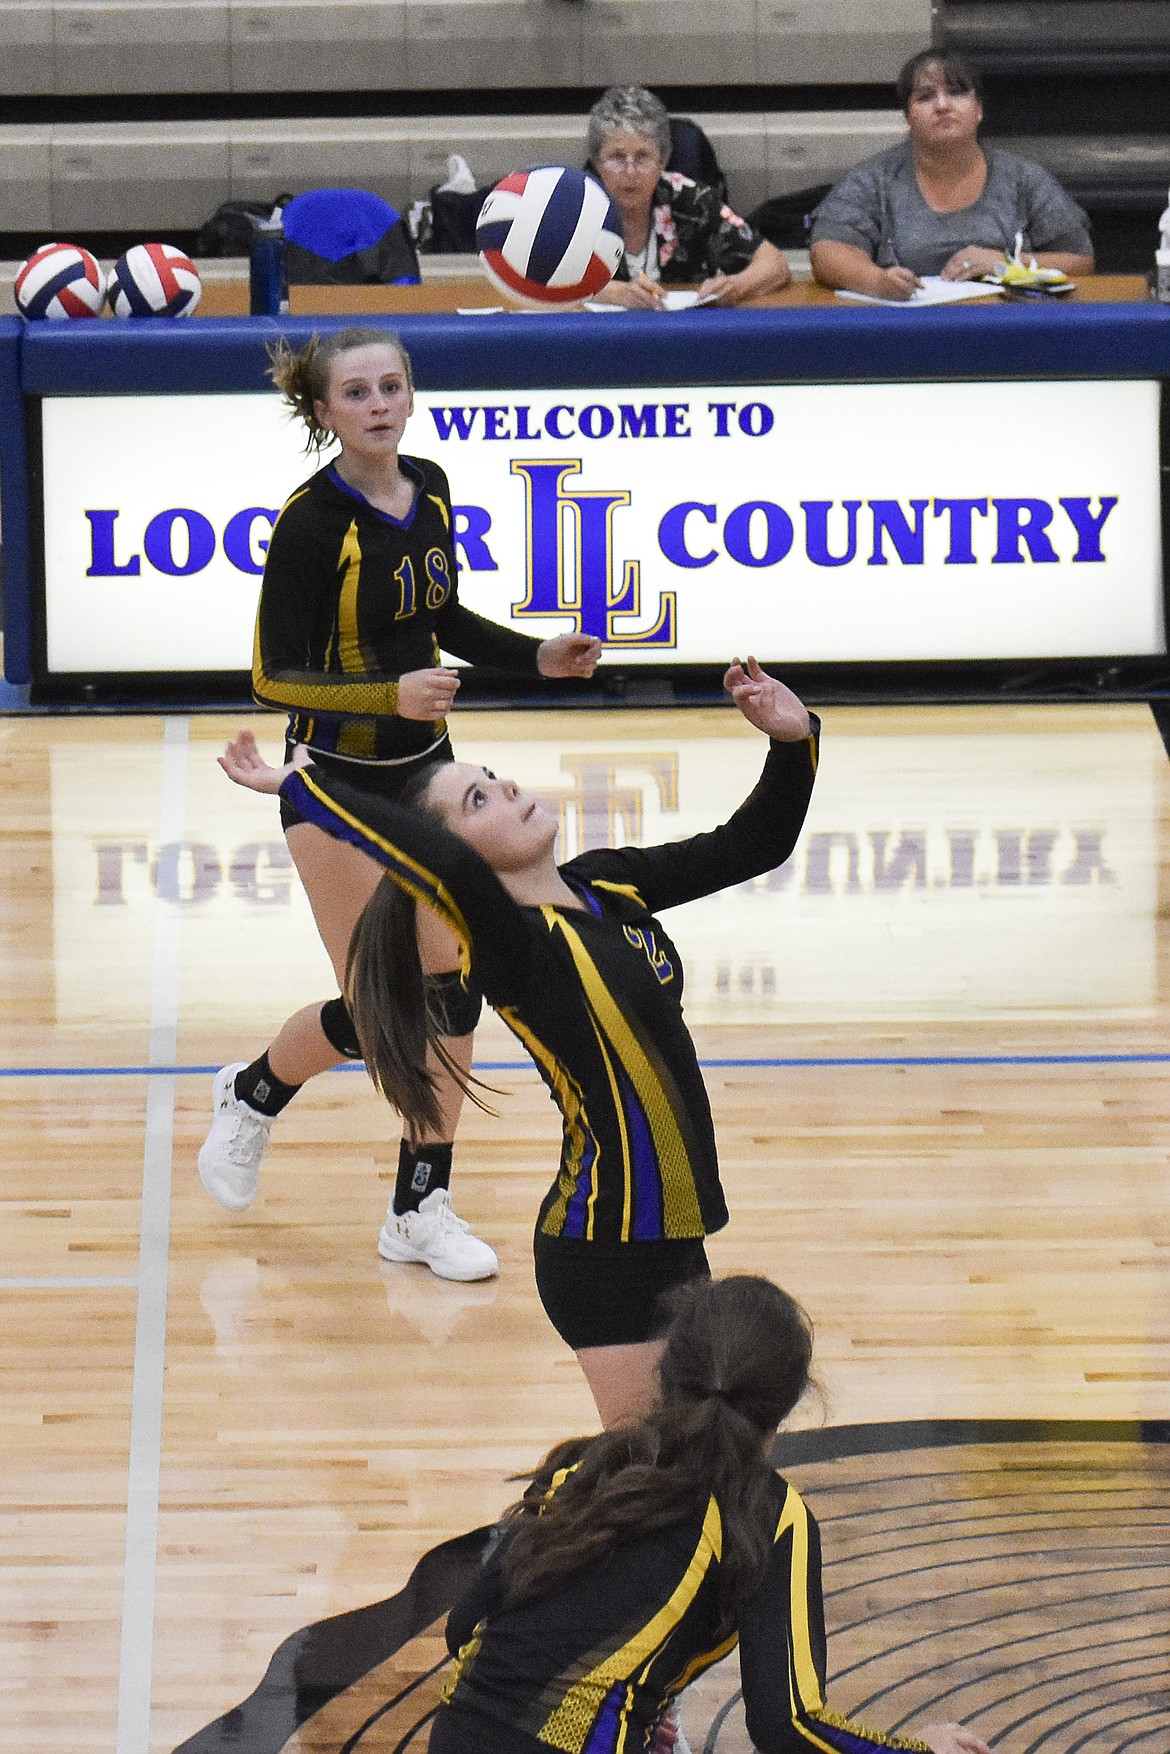 Libby junior Sheyla Gallagher comes up with a dig for the set-winning point during the first set against Polson Saturday. (Ben Kibbey/The Western News)